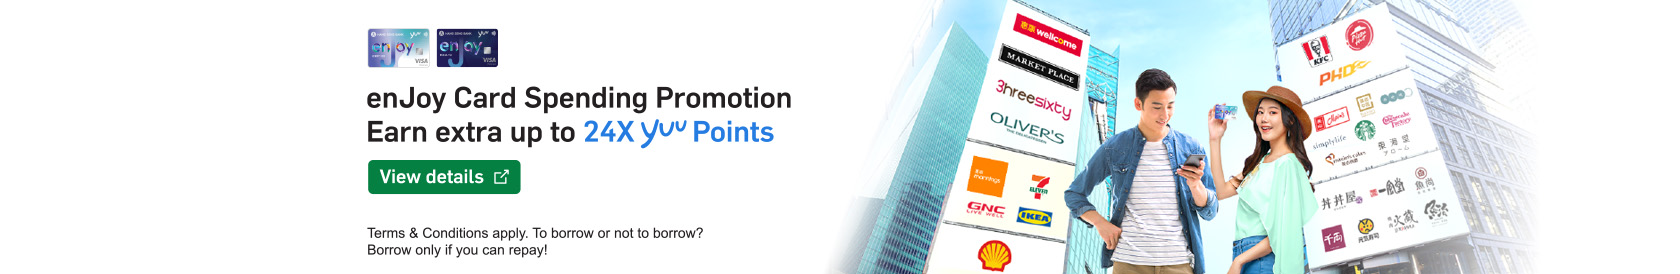 View details, enJoy Card Spending Promotion earn extra up to 24X yuu Points, opens in a new window